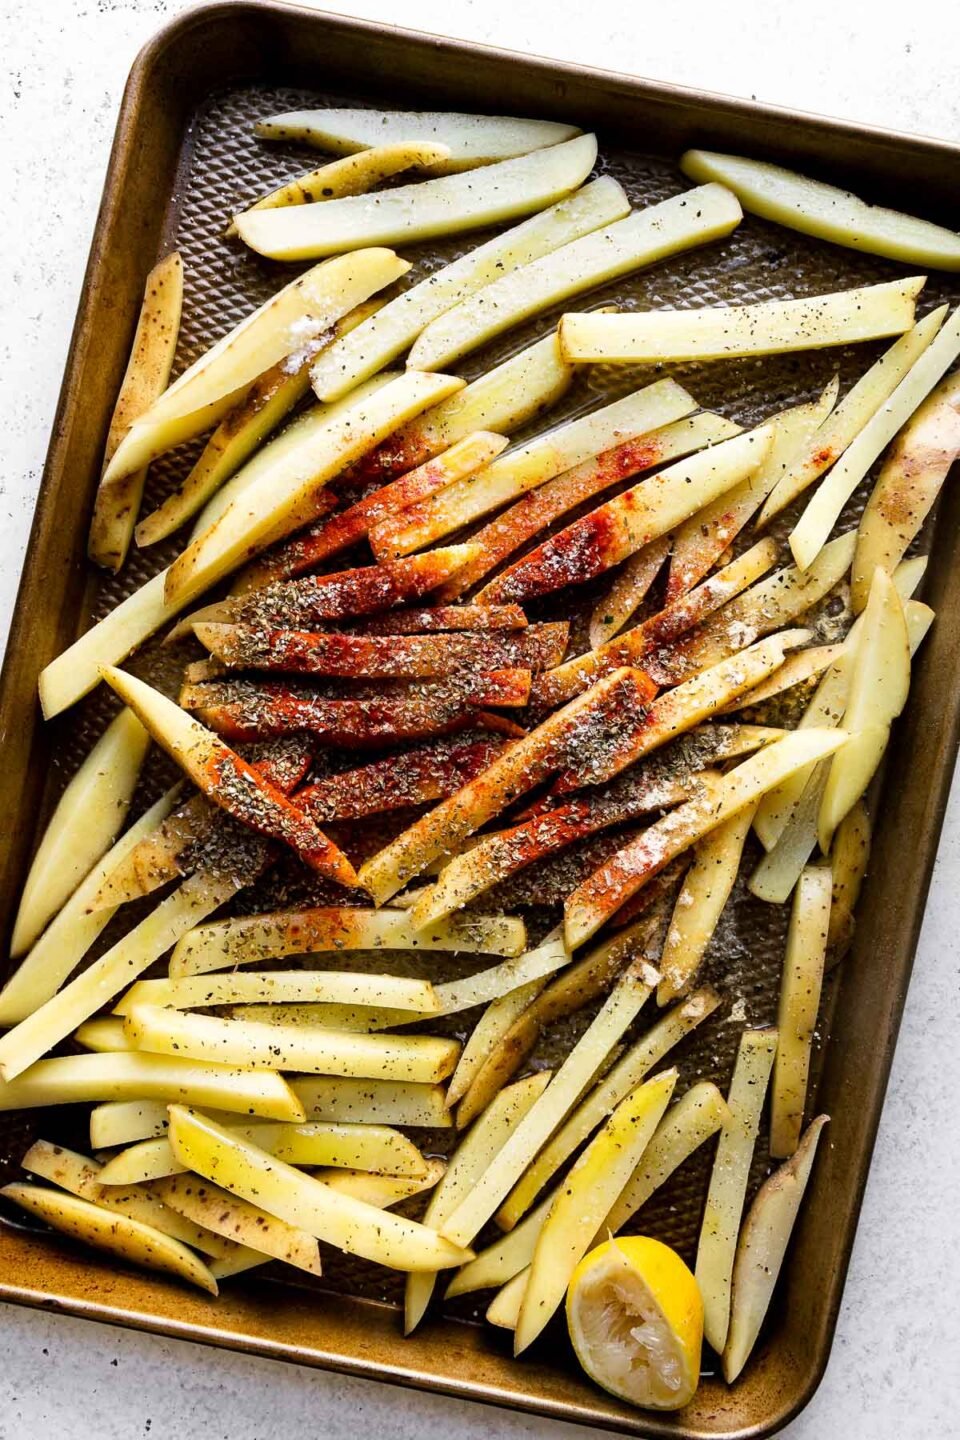 Gold potatoes sliced into 1/3-inch fries are arranged on a small baking sheet. The potatoes have been prepared for roasting with a drizzle of olive oil, and seasoned with lemon juice, dried oregano, smoked paprika, & garlic powder over top. One lemon halved rests along with the sliced potato on the baking sheet and the baking sheet sits atop a creamy white textured surface.